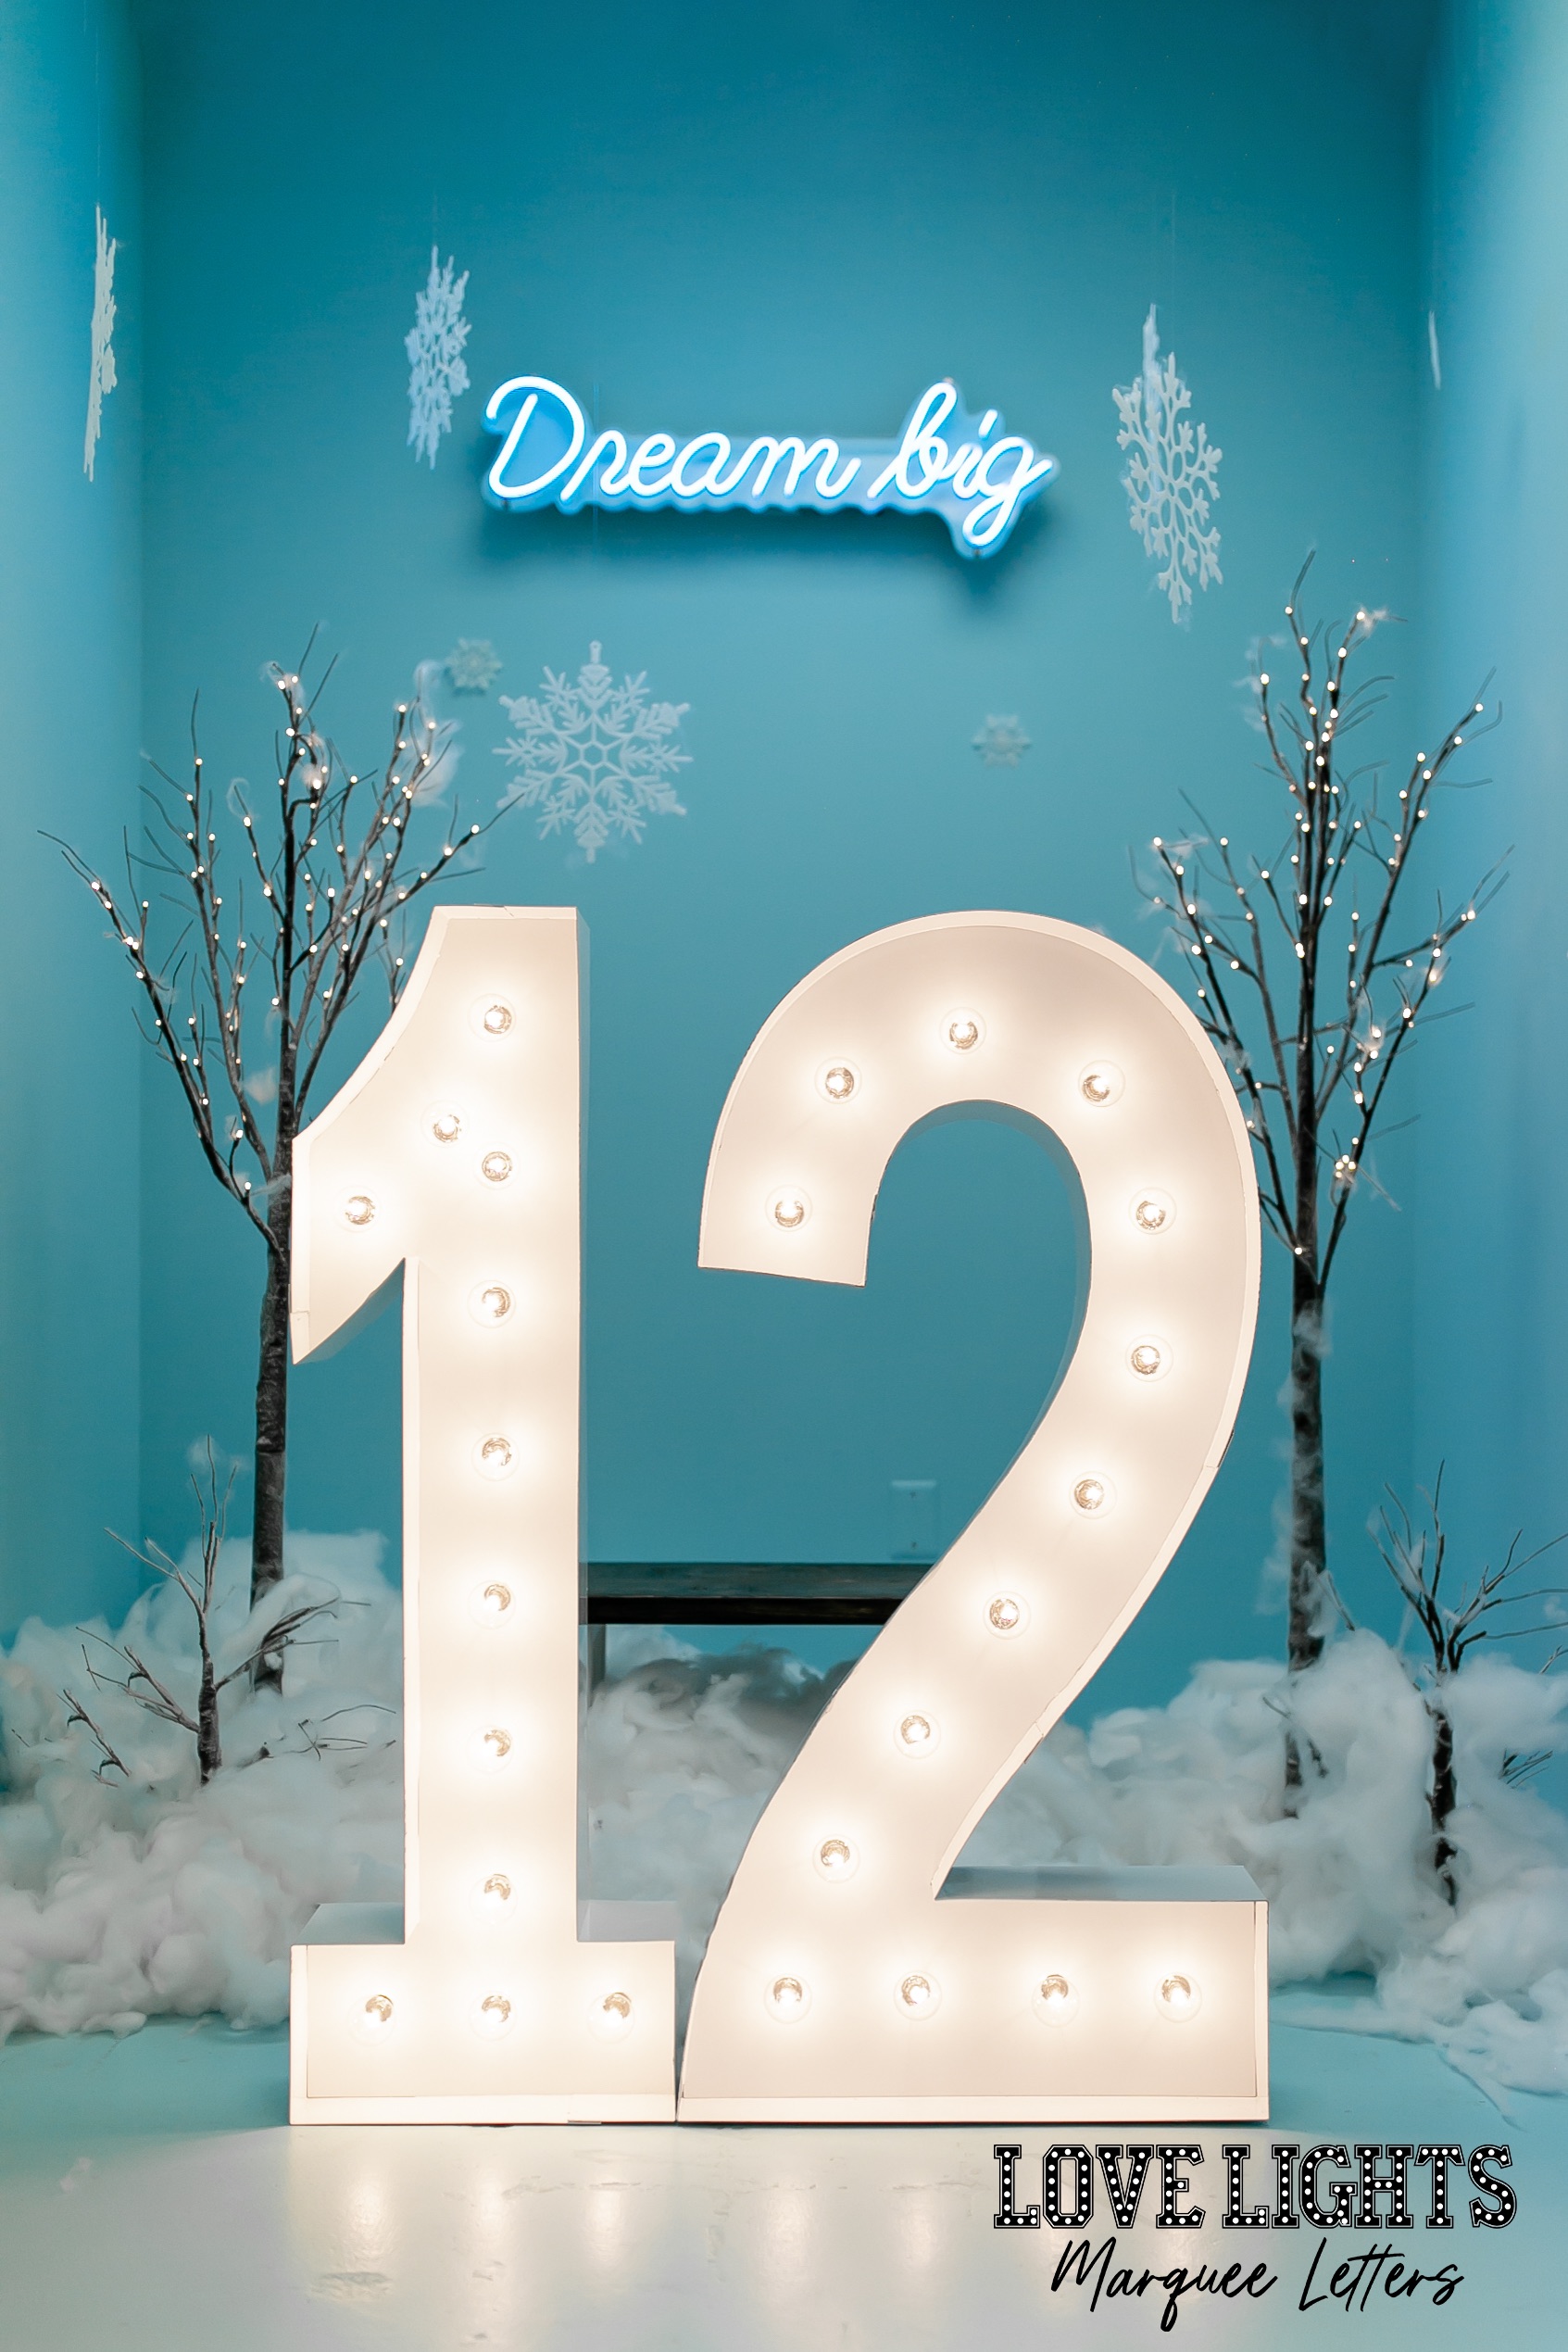 12 in lit marquee letters in a blue winter room with words Dream Big